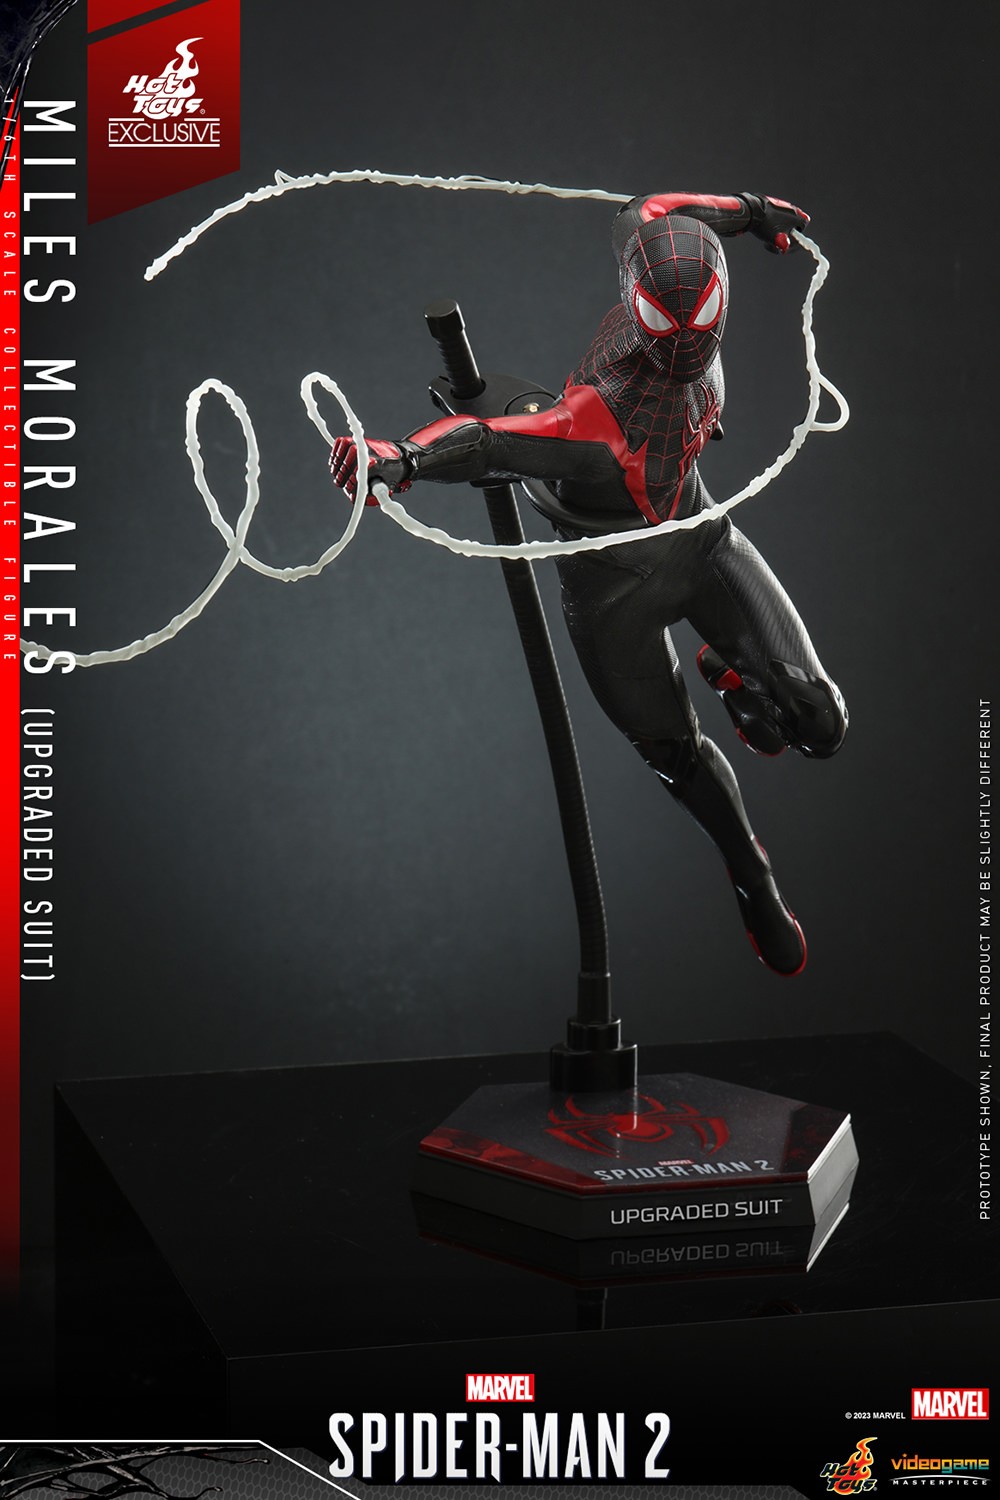 Spider-Man 2 Collector's Edition Statue. Such a 🔥🔥🔥 piece, I can't